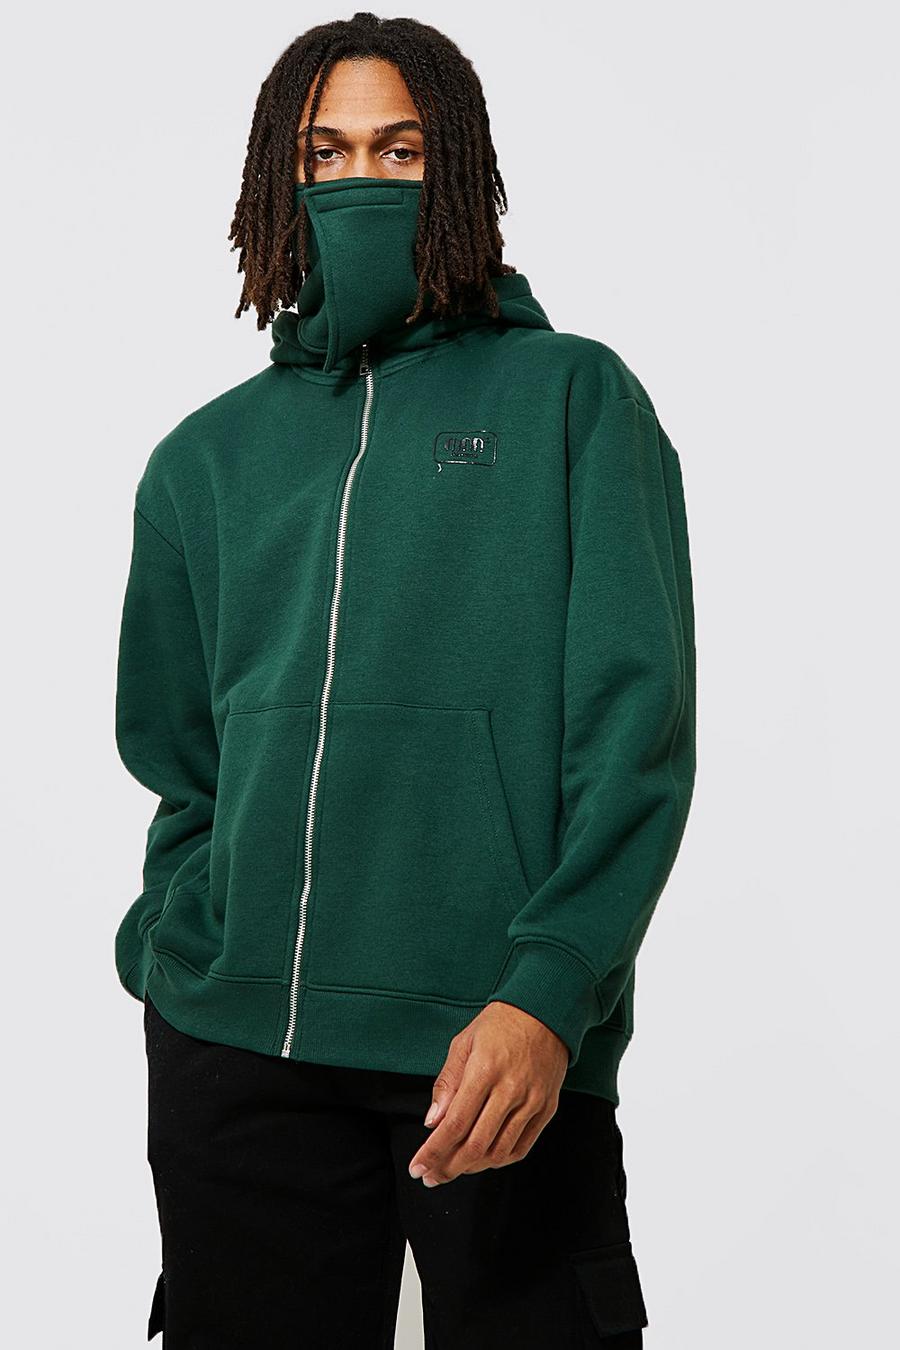 Forest green Oversized Man Zip Hoodie With Face Covering